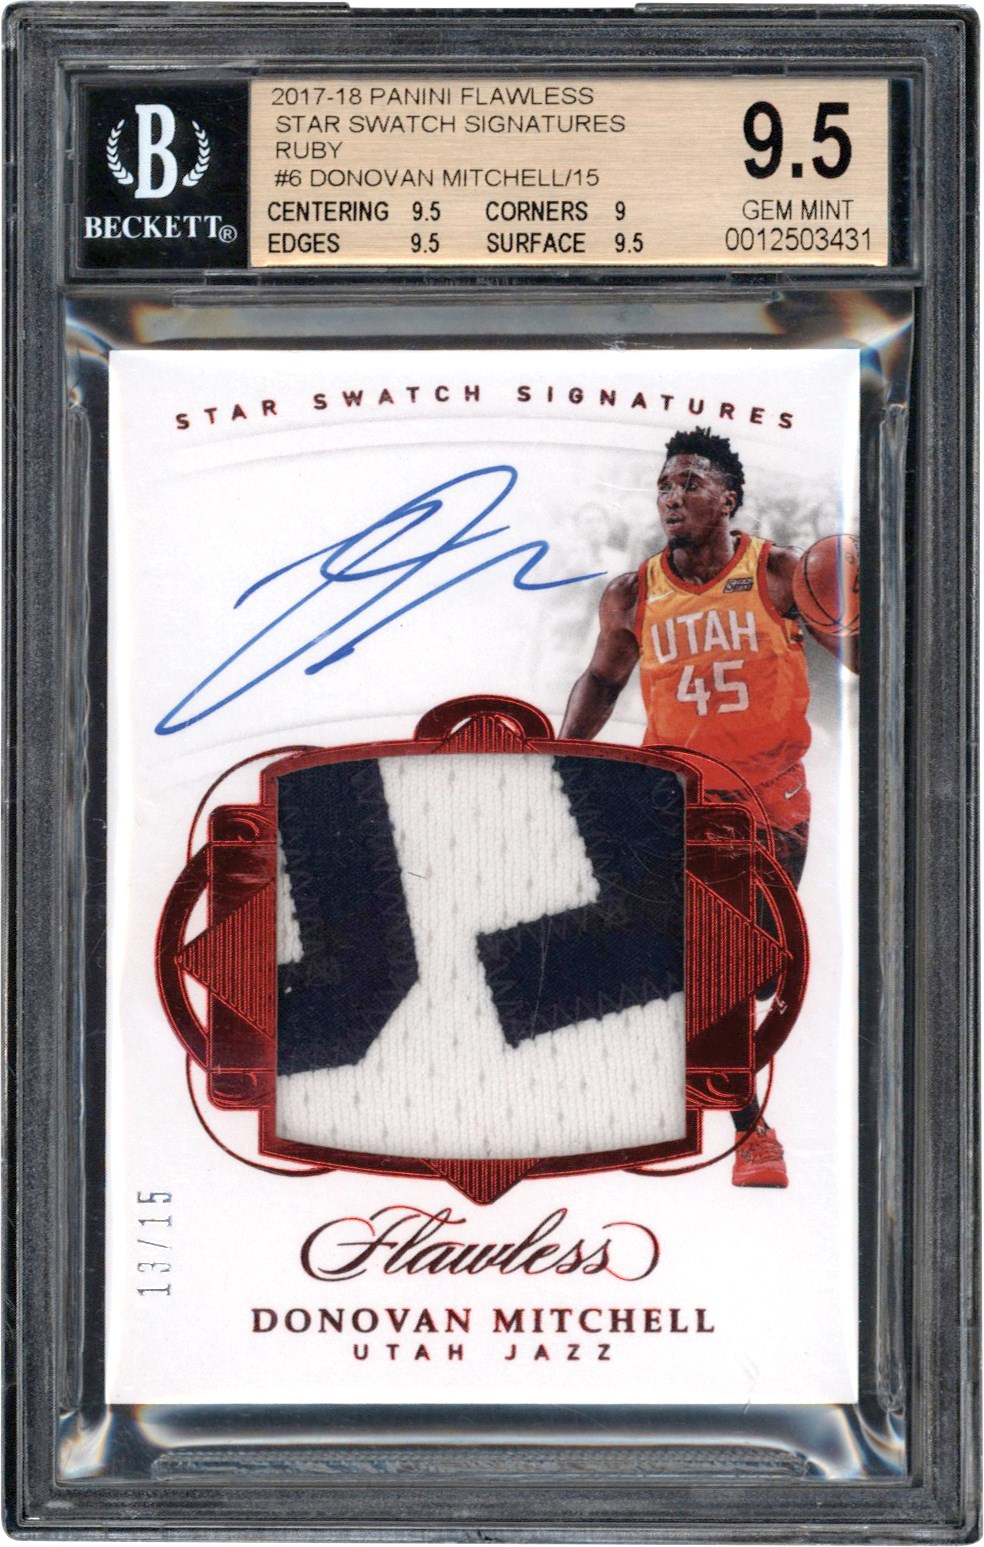 Basketball Cards - 2017-2018 Panini Flawless Basketball Star Swatch Signatures Ruby #6 Donovan Mitchell Game Used RPA Card #13/15 BGS GEM MINT 9.5 Auto 10